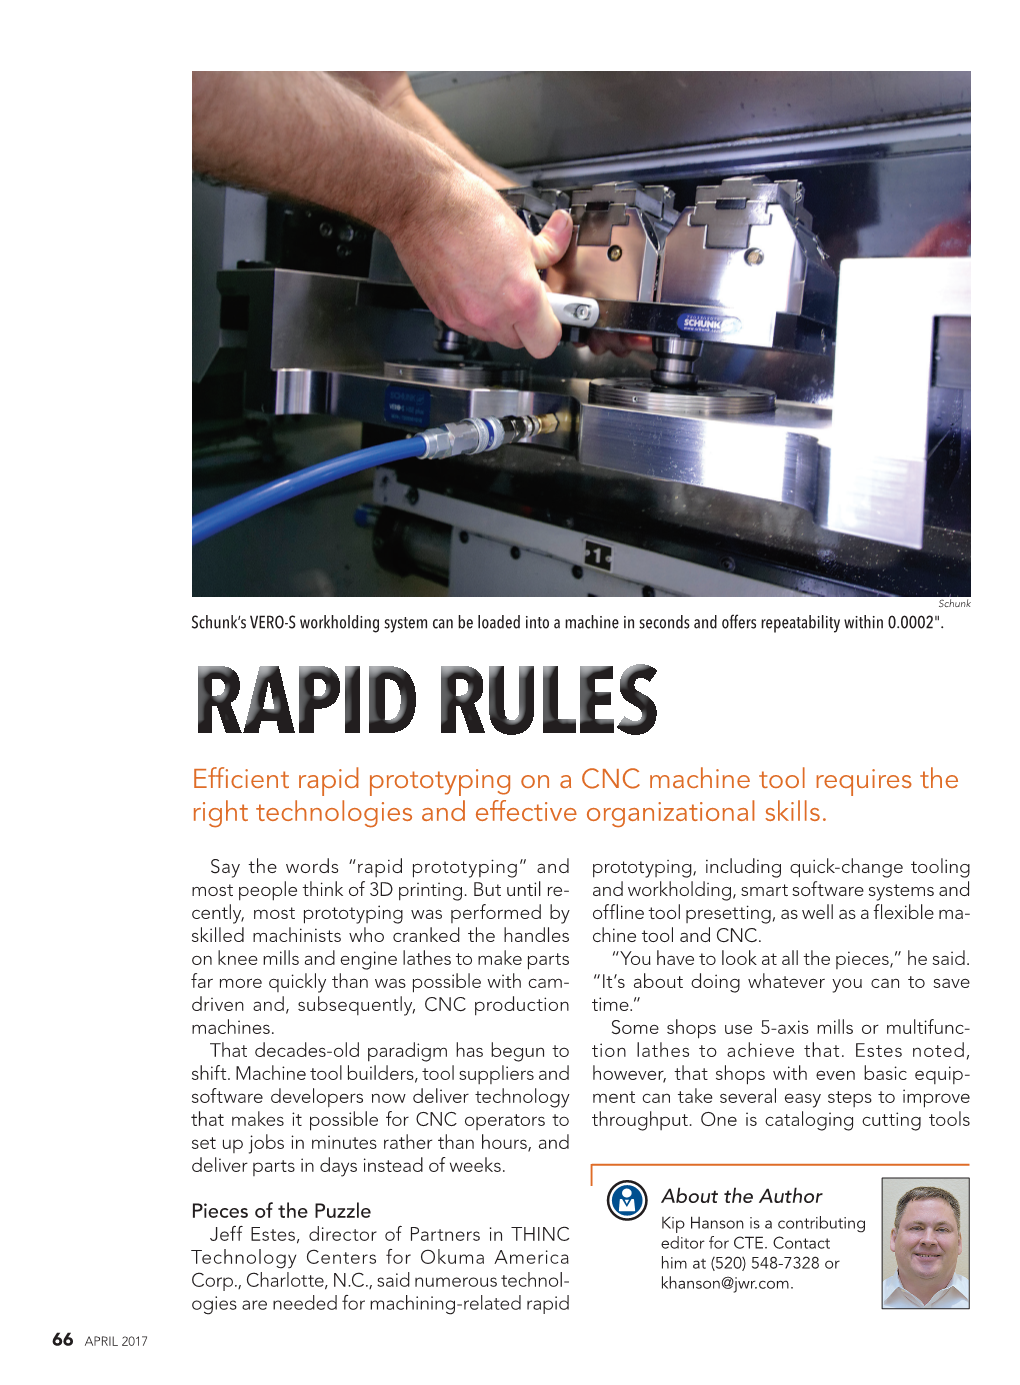 Efficient Rapid Prototyping on a CNC Machine Tool Requires the Right Technologies and Effective Organizational Skills